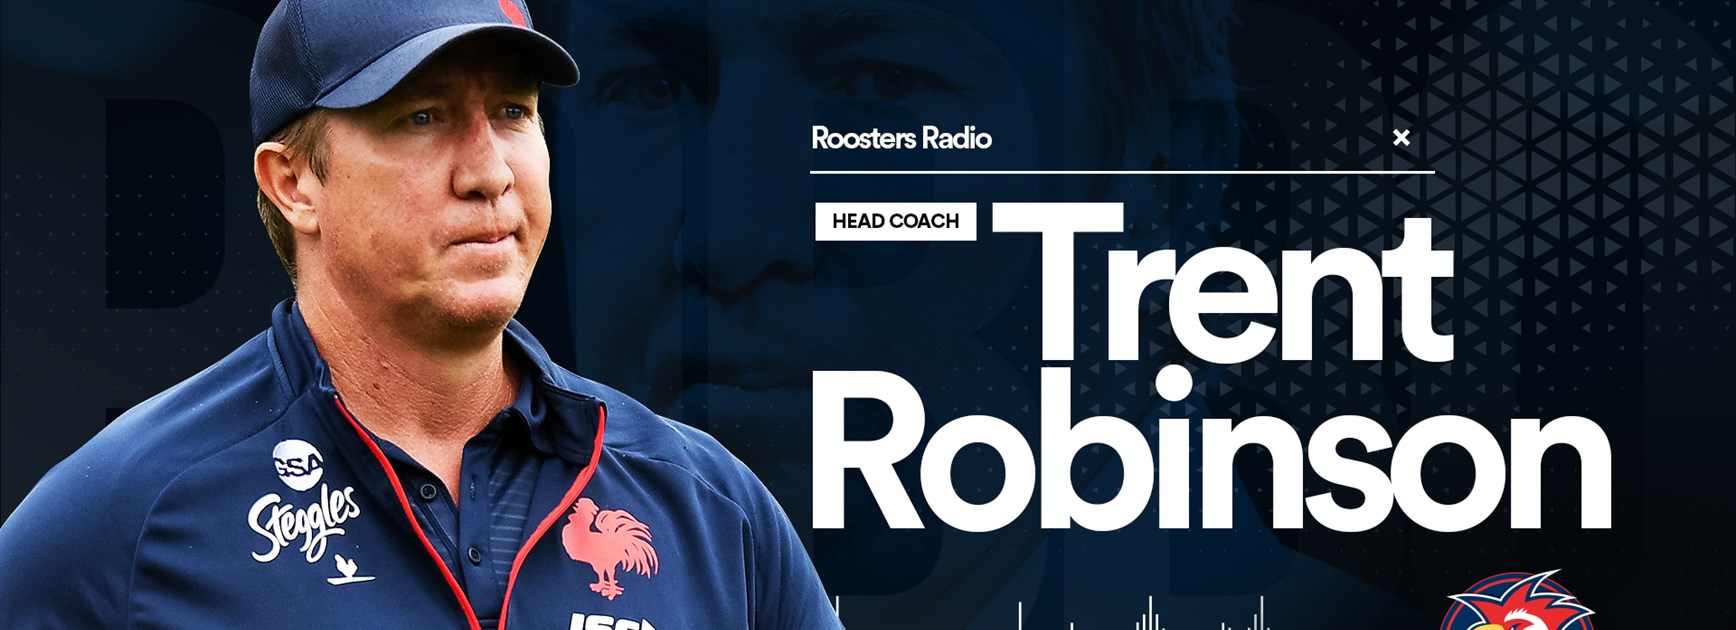 Roosters Radio | Trent Robinson